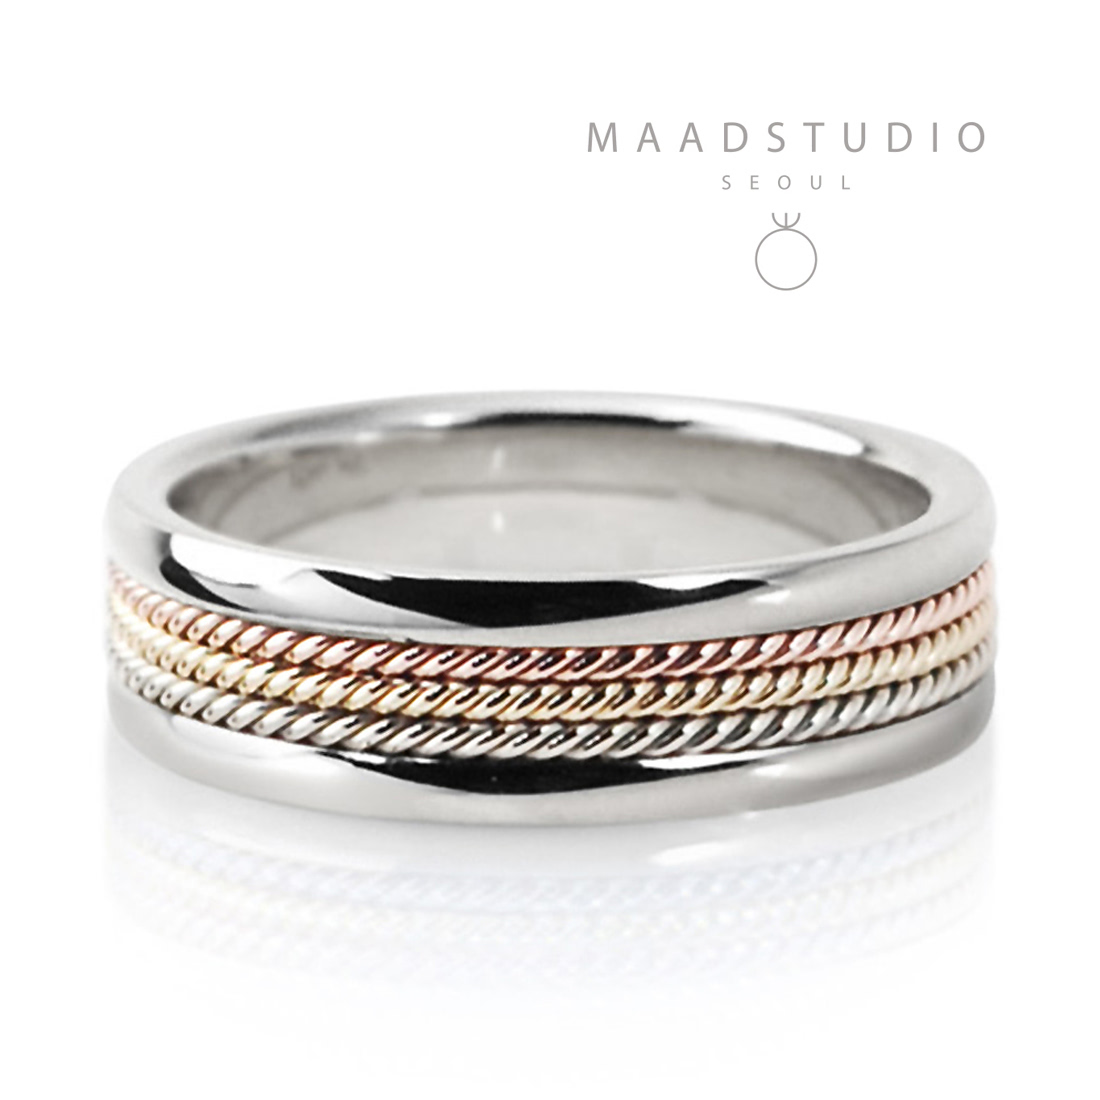 Roman wired ring (S) 14k white gold & Trinity gold